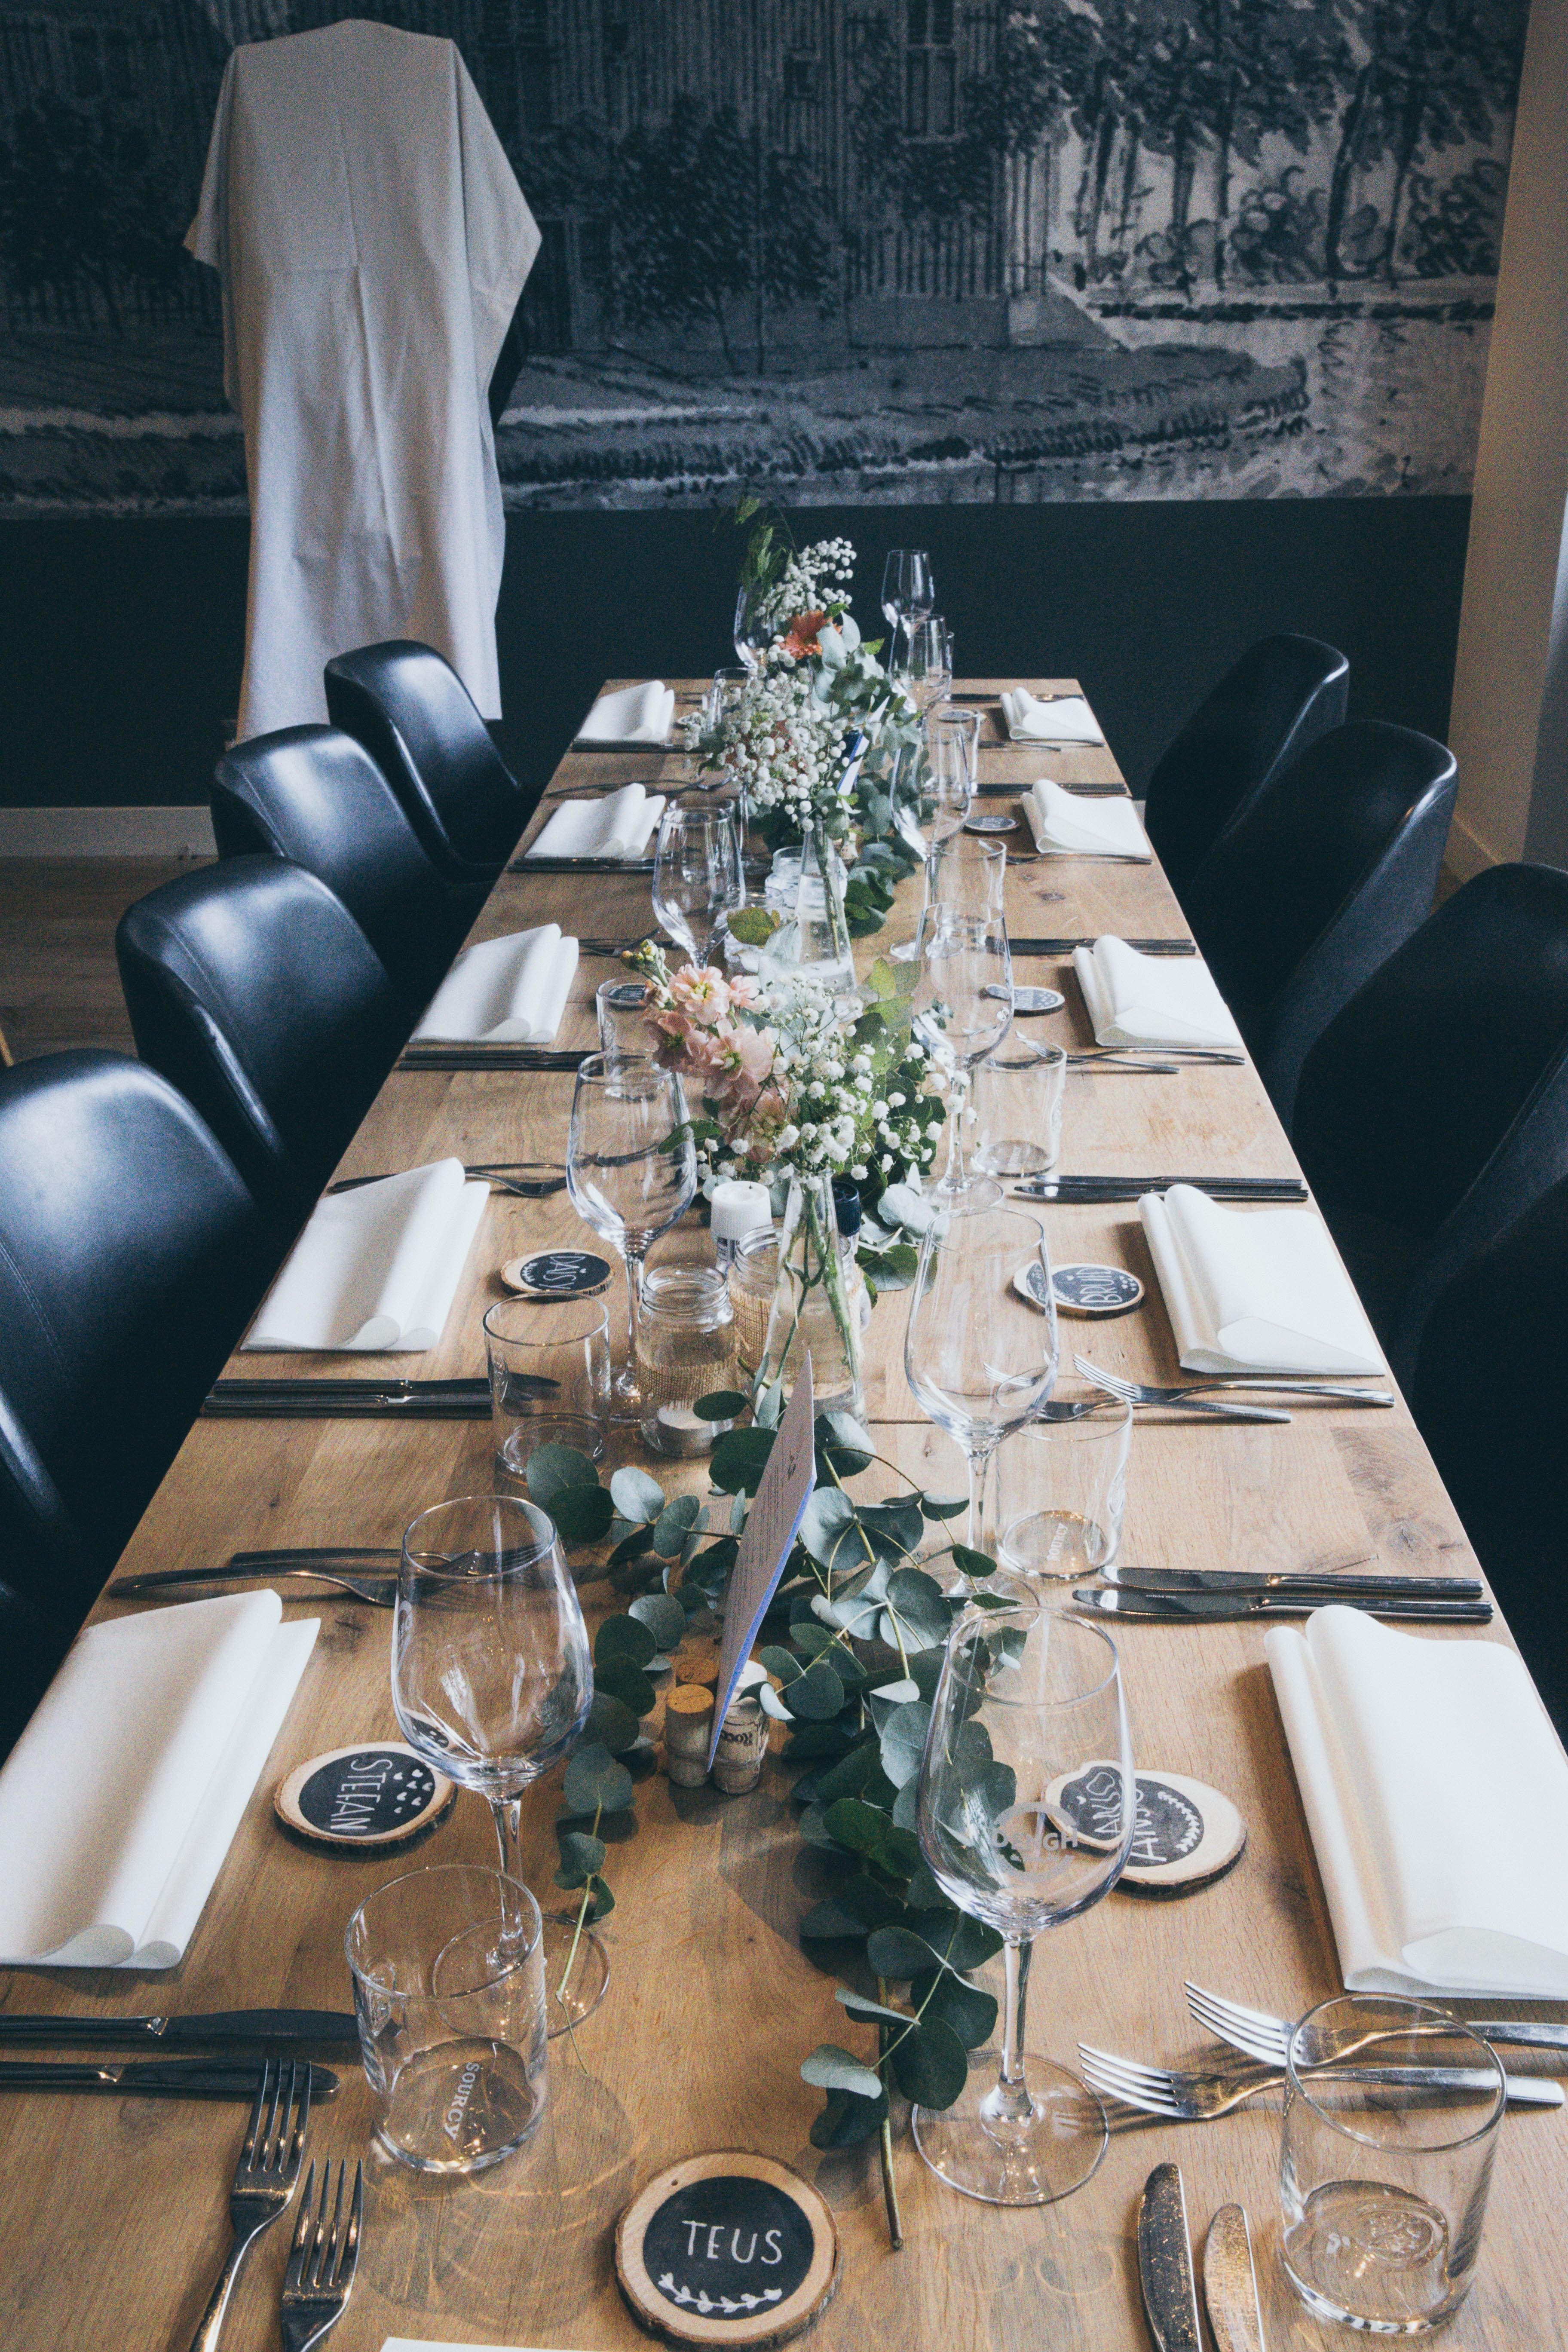 Ideas for Your Company’s Next Corporate Dinner